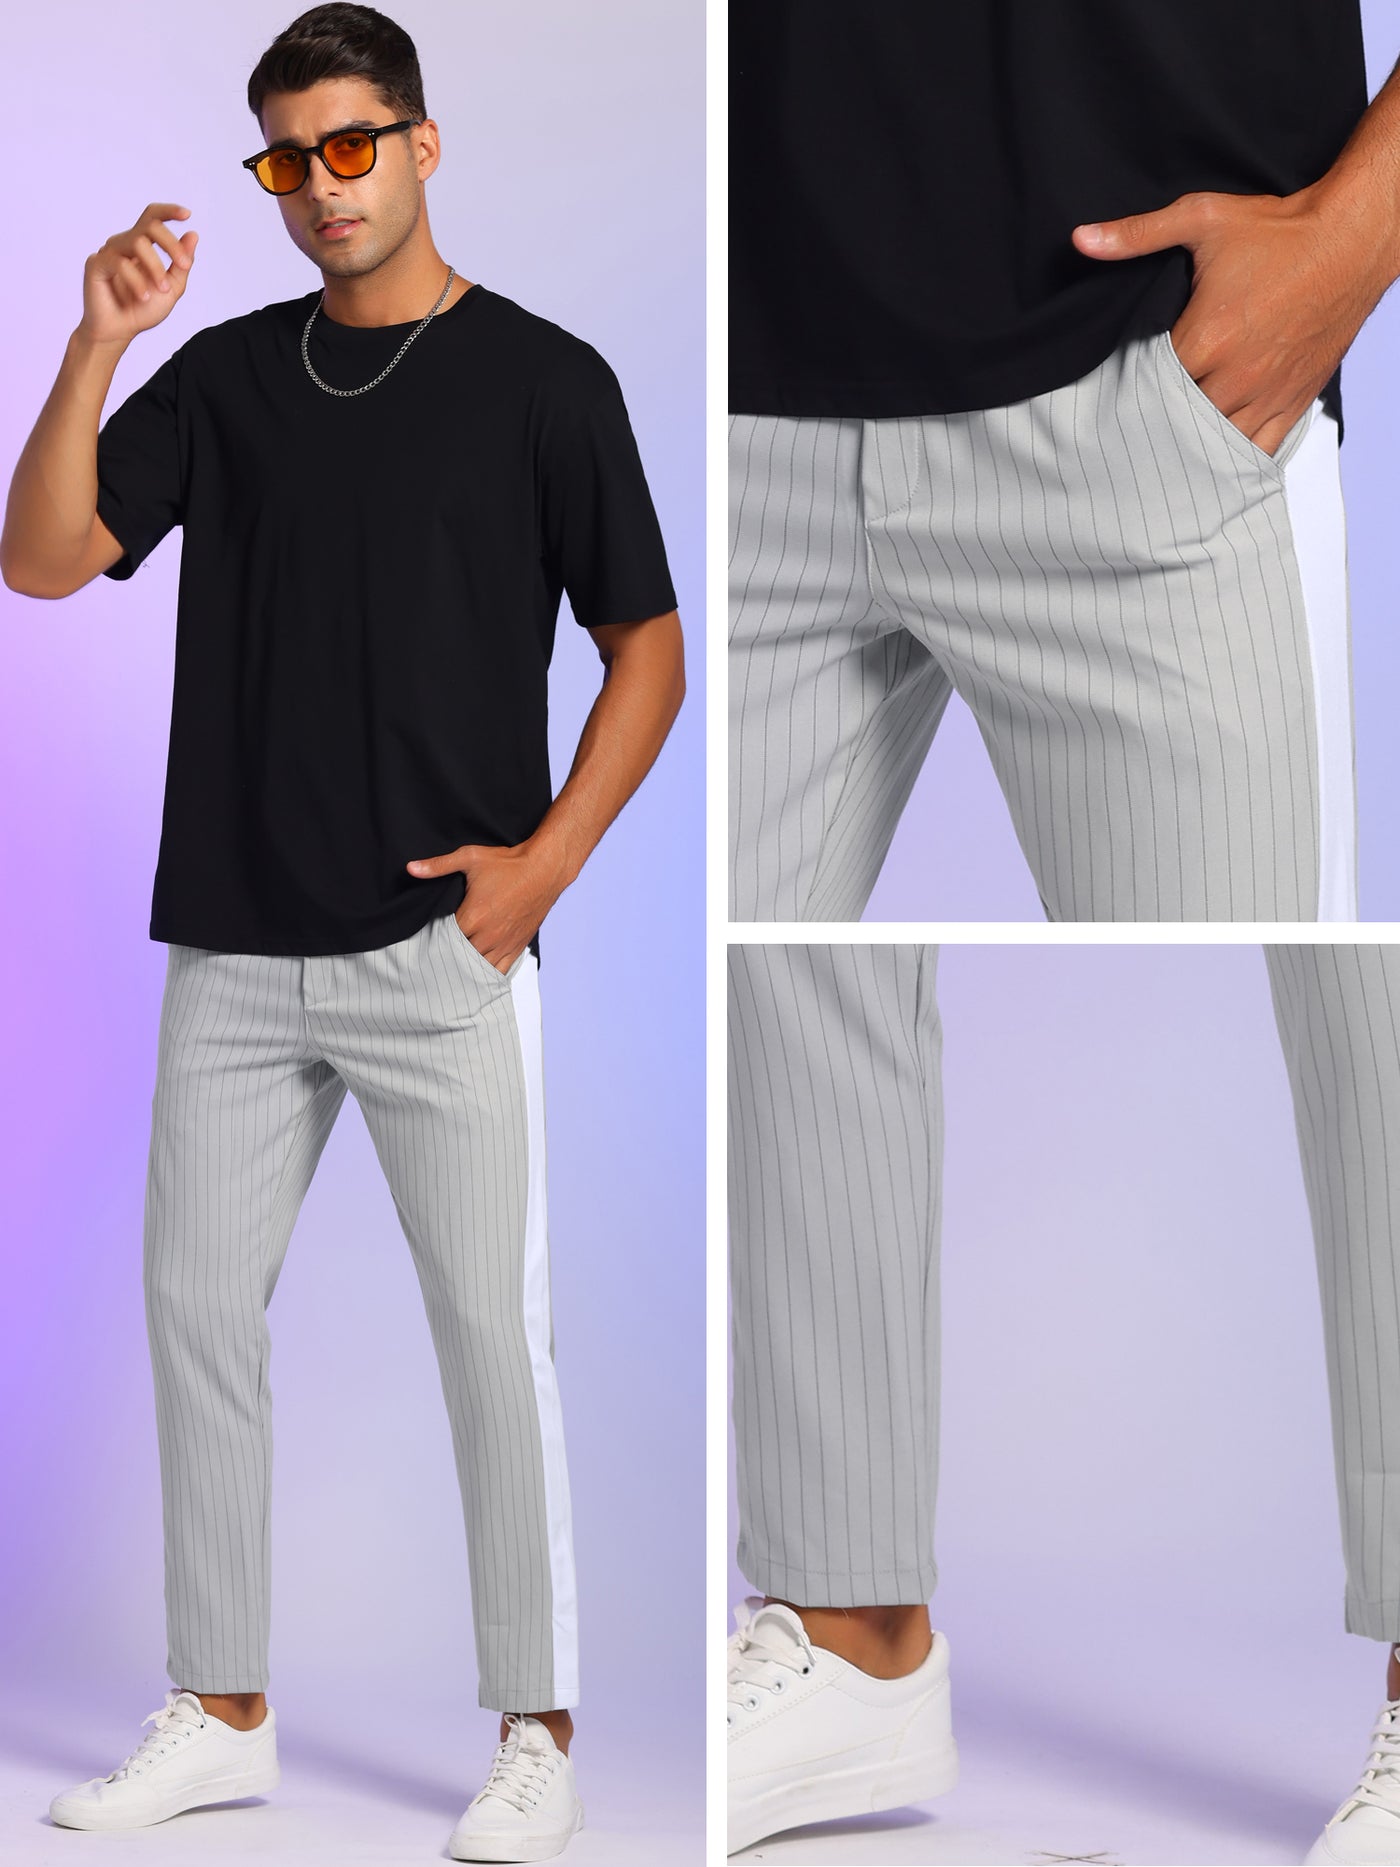 Bublédon Men's Striped Pants Drawstring Waist Contrast Color Tapered Trousers